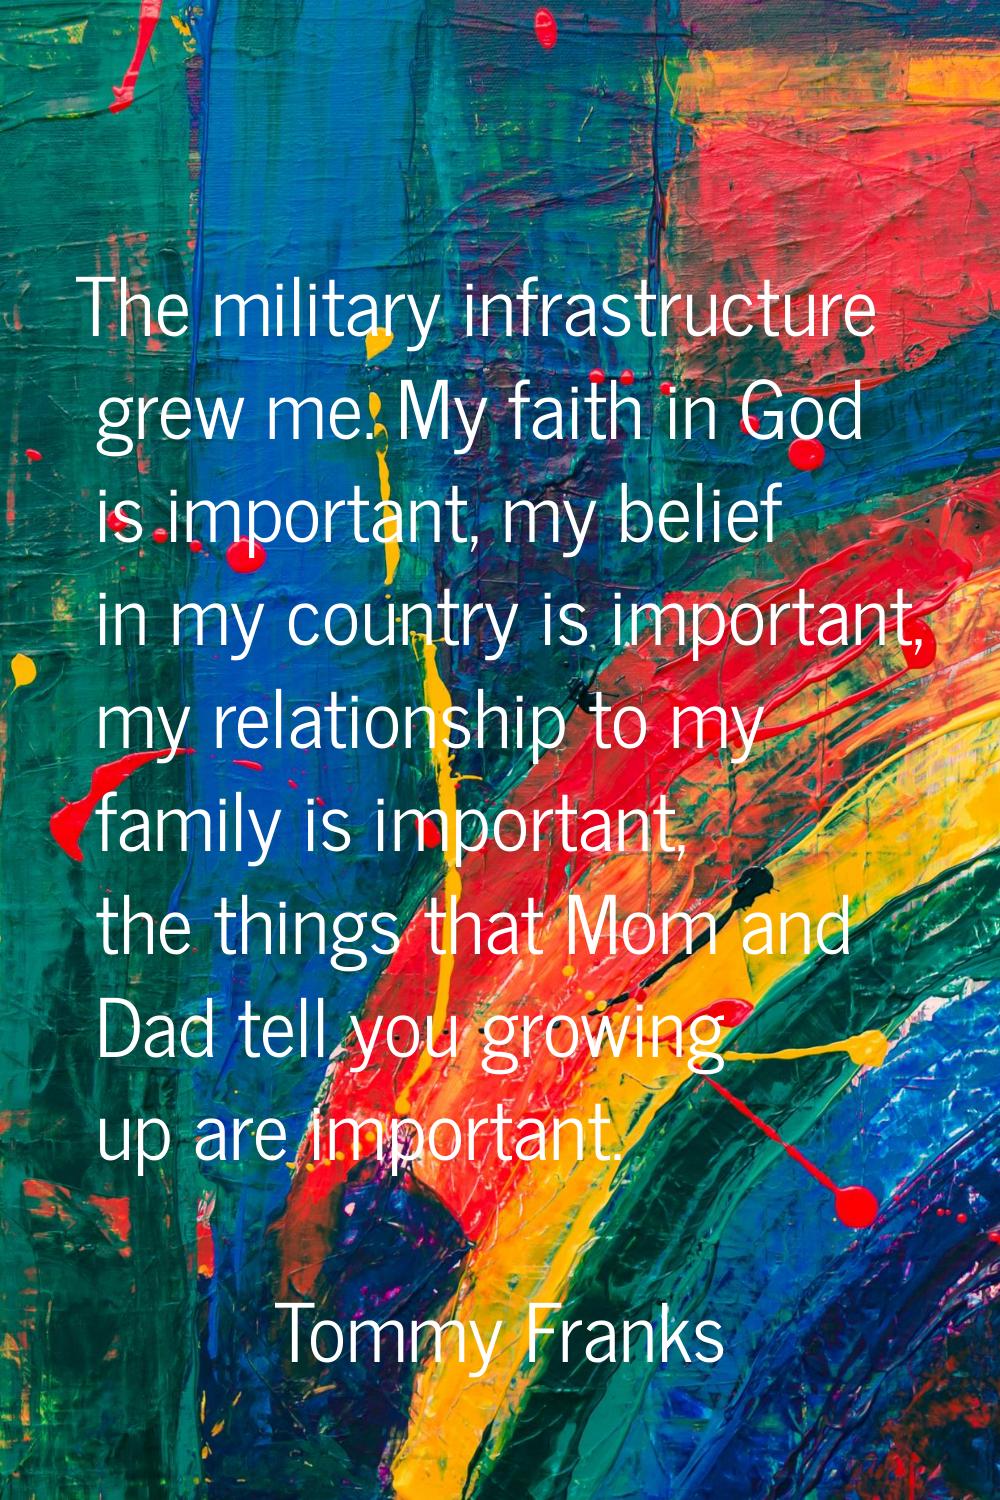 The military infrastructure grew me. My faith in God is important, my belief in my country is impor